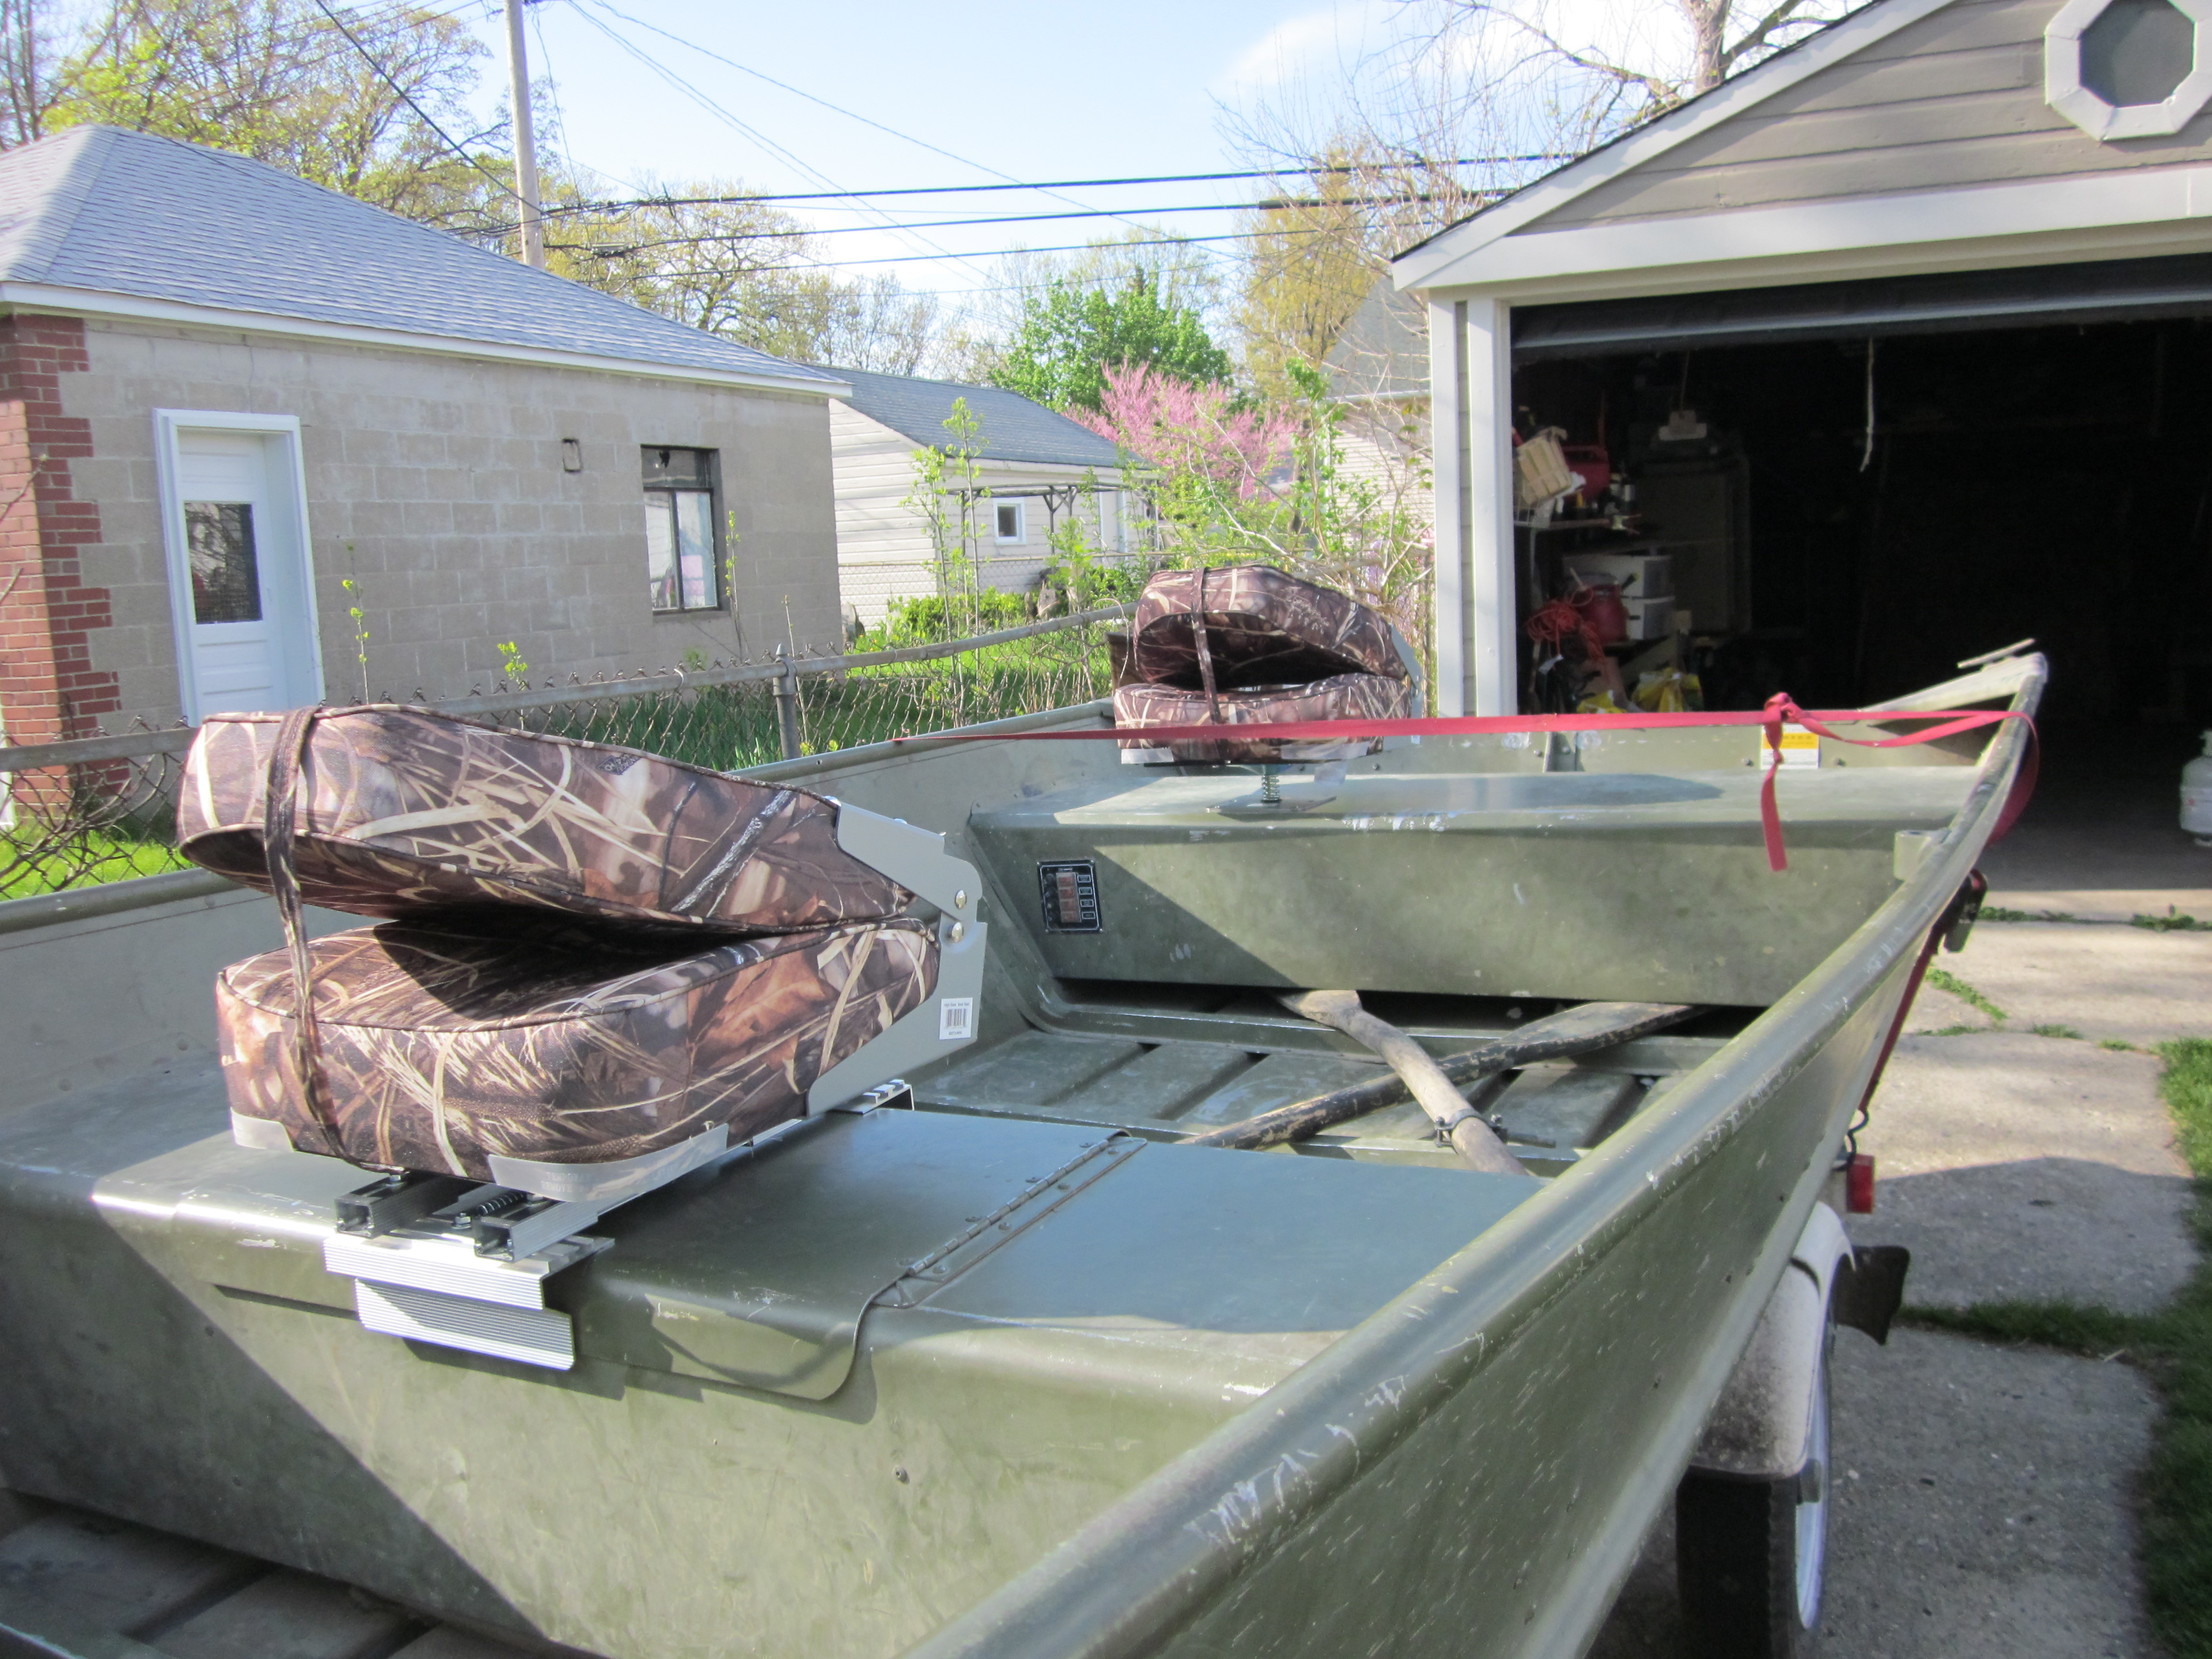 Published on April 21, 2012 in Installing New Boat Seats ⋅ Full size 